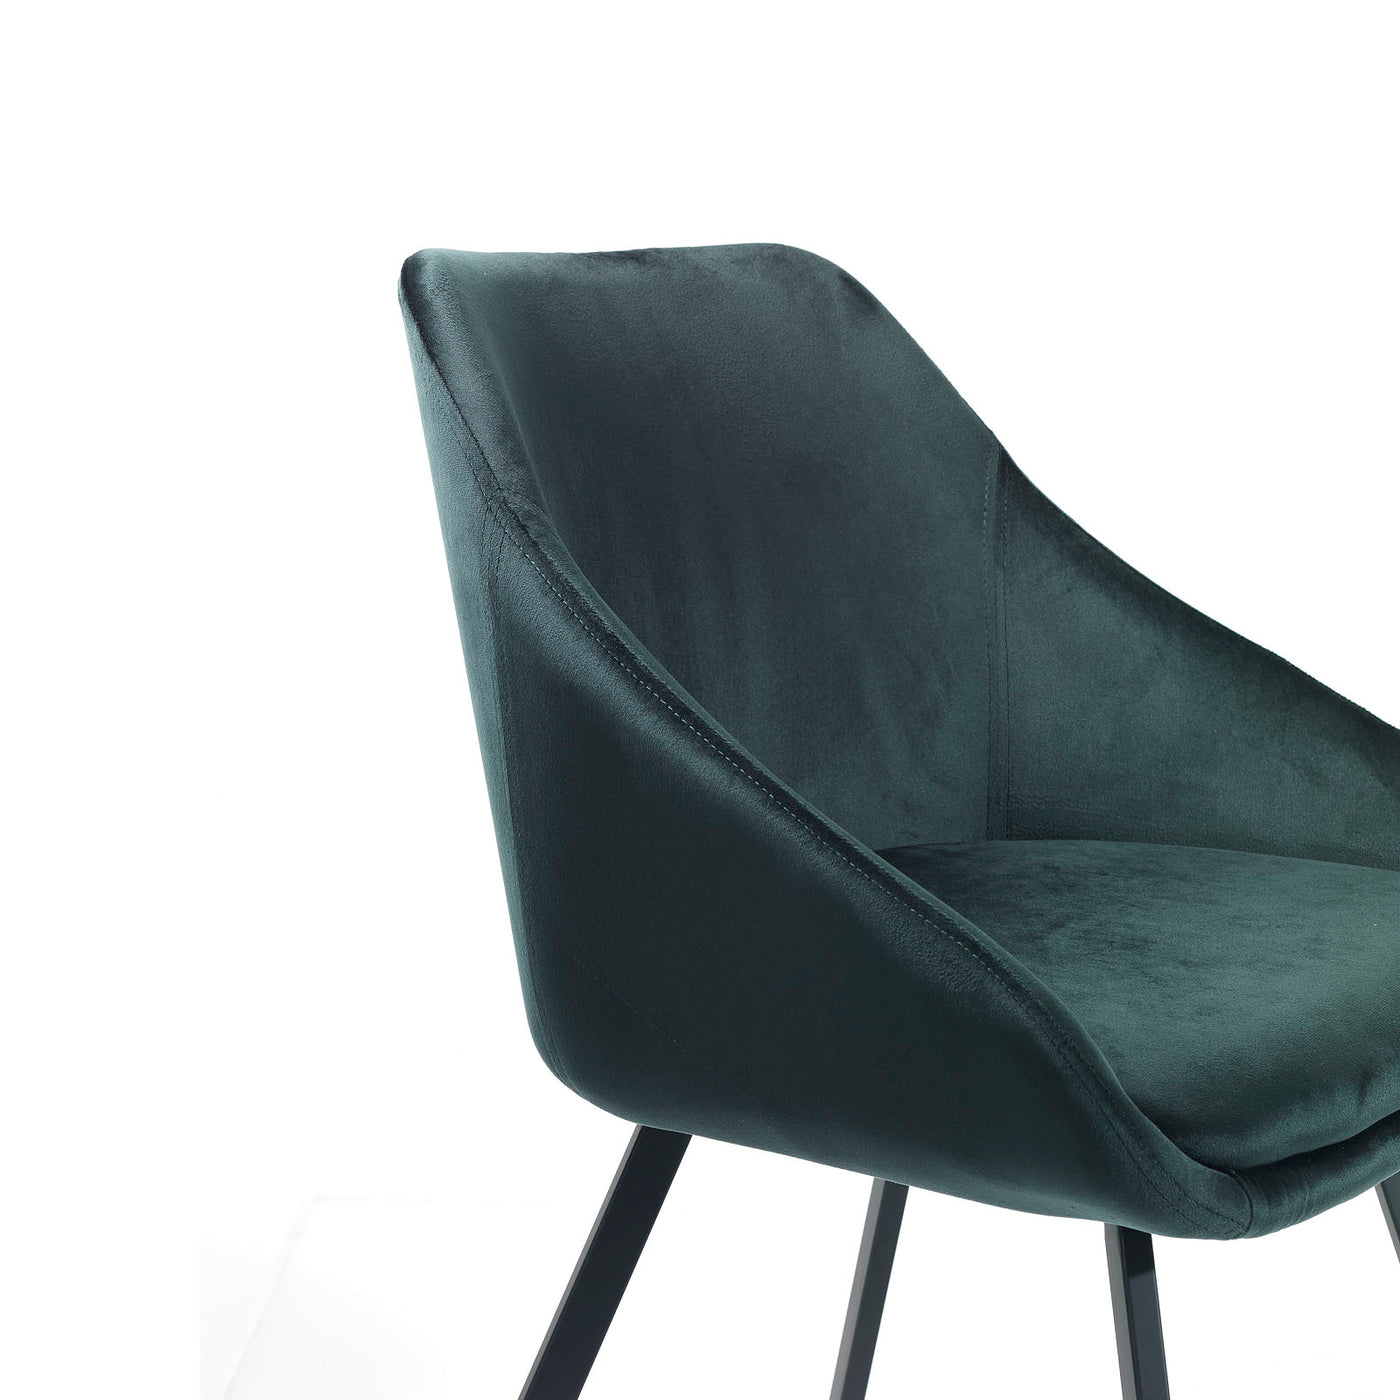 Set of 2 petrol green MONZA chairs